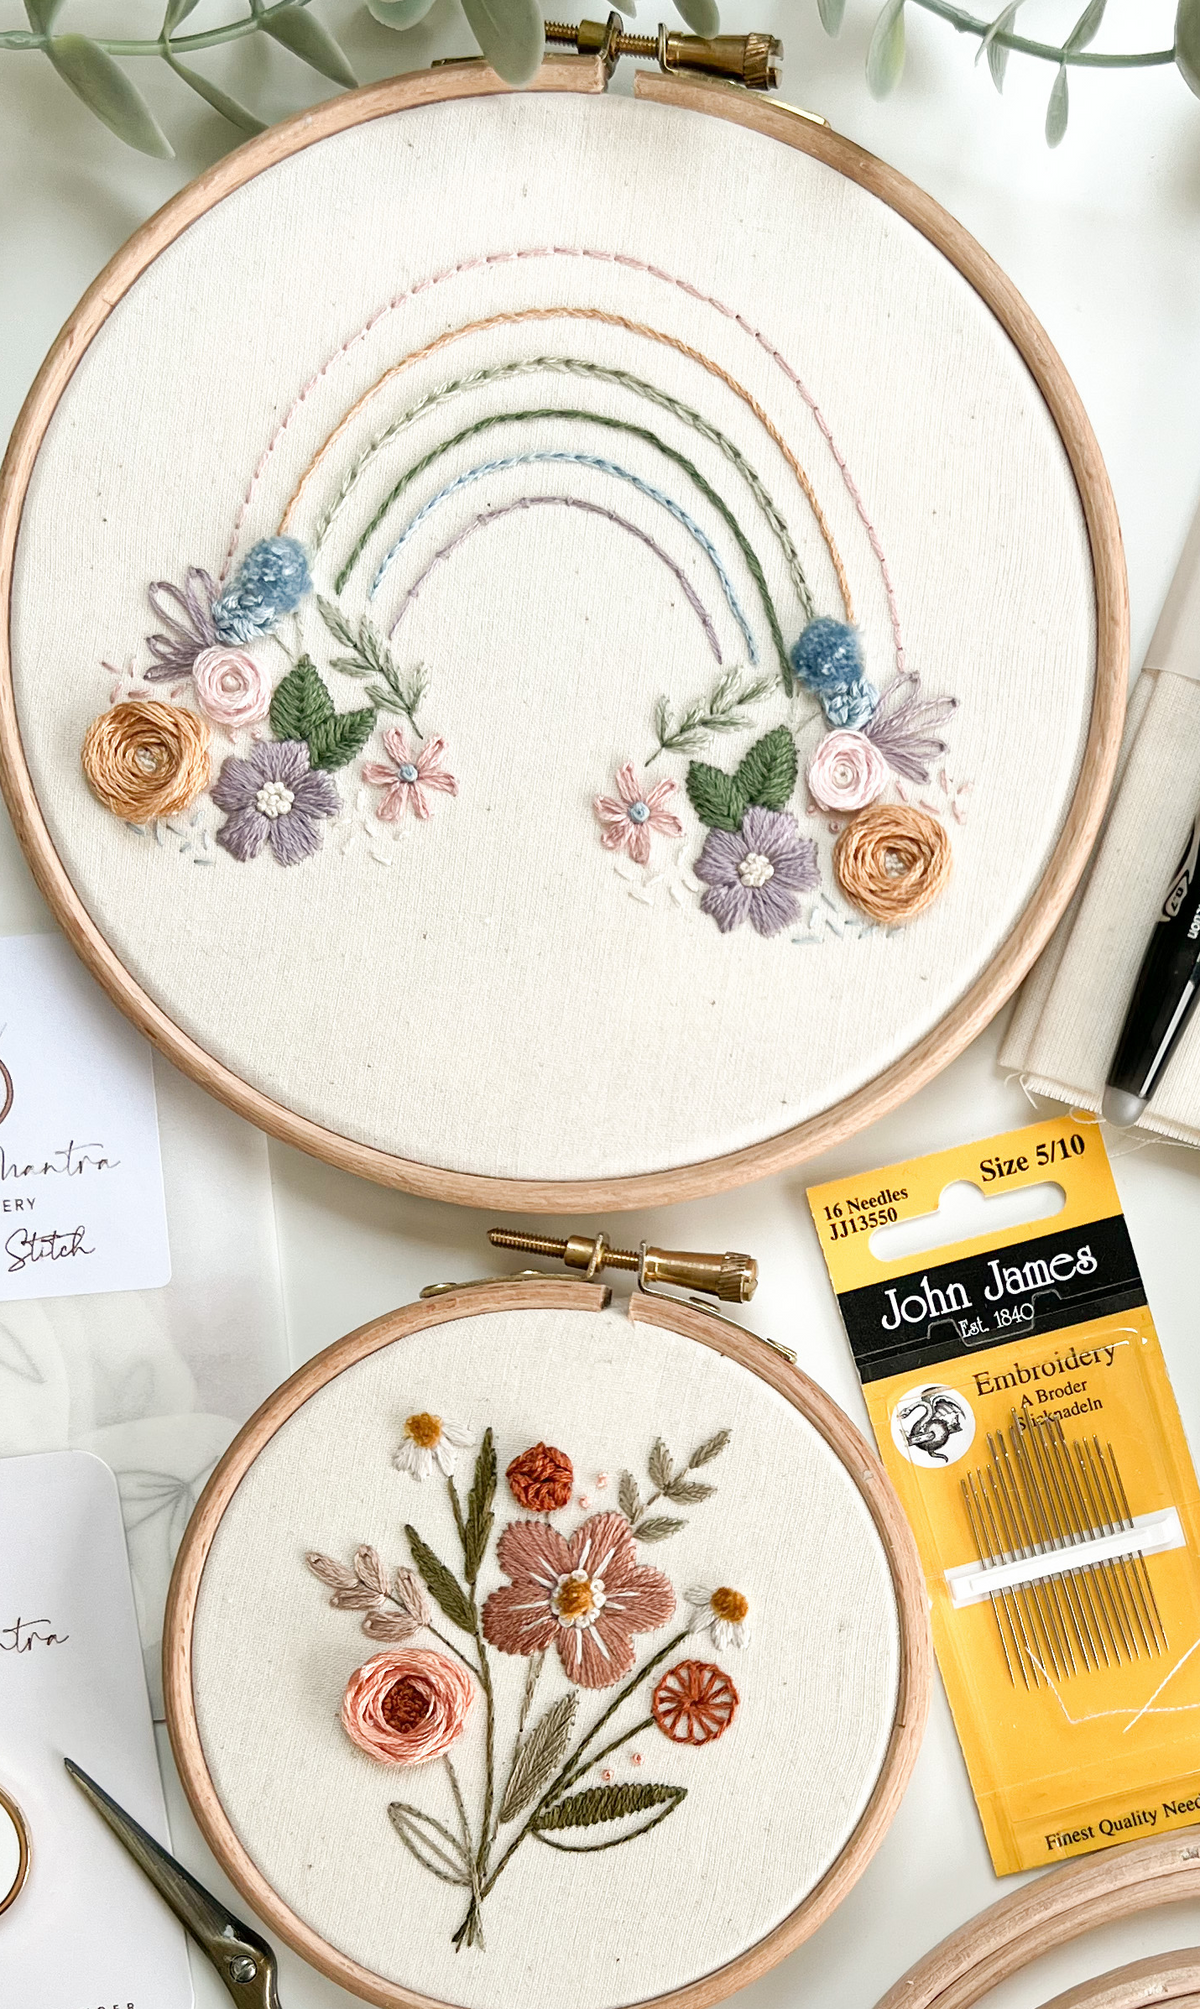 How to use Stick & Stitch to transfer your embroidery design - And